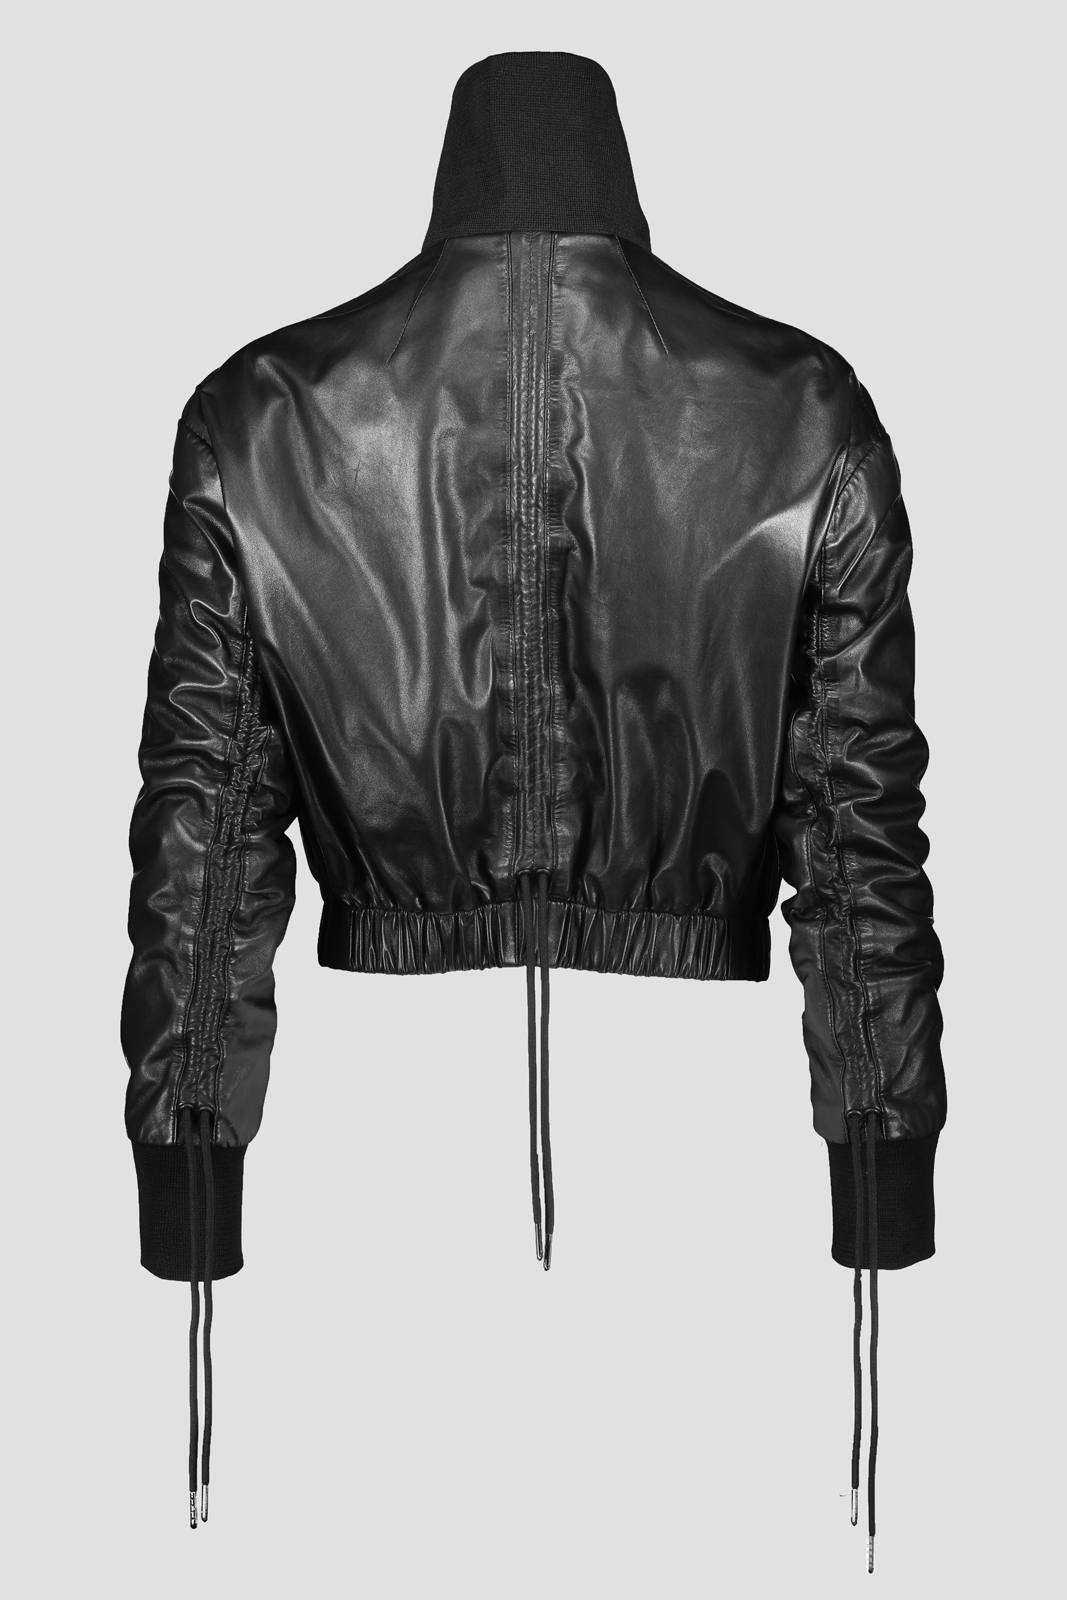 JET — The Face New York Official Online Store | Designer Leather Clothing